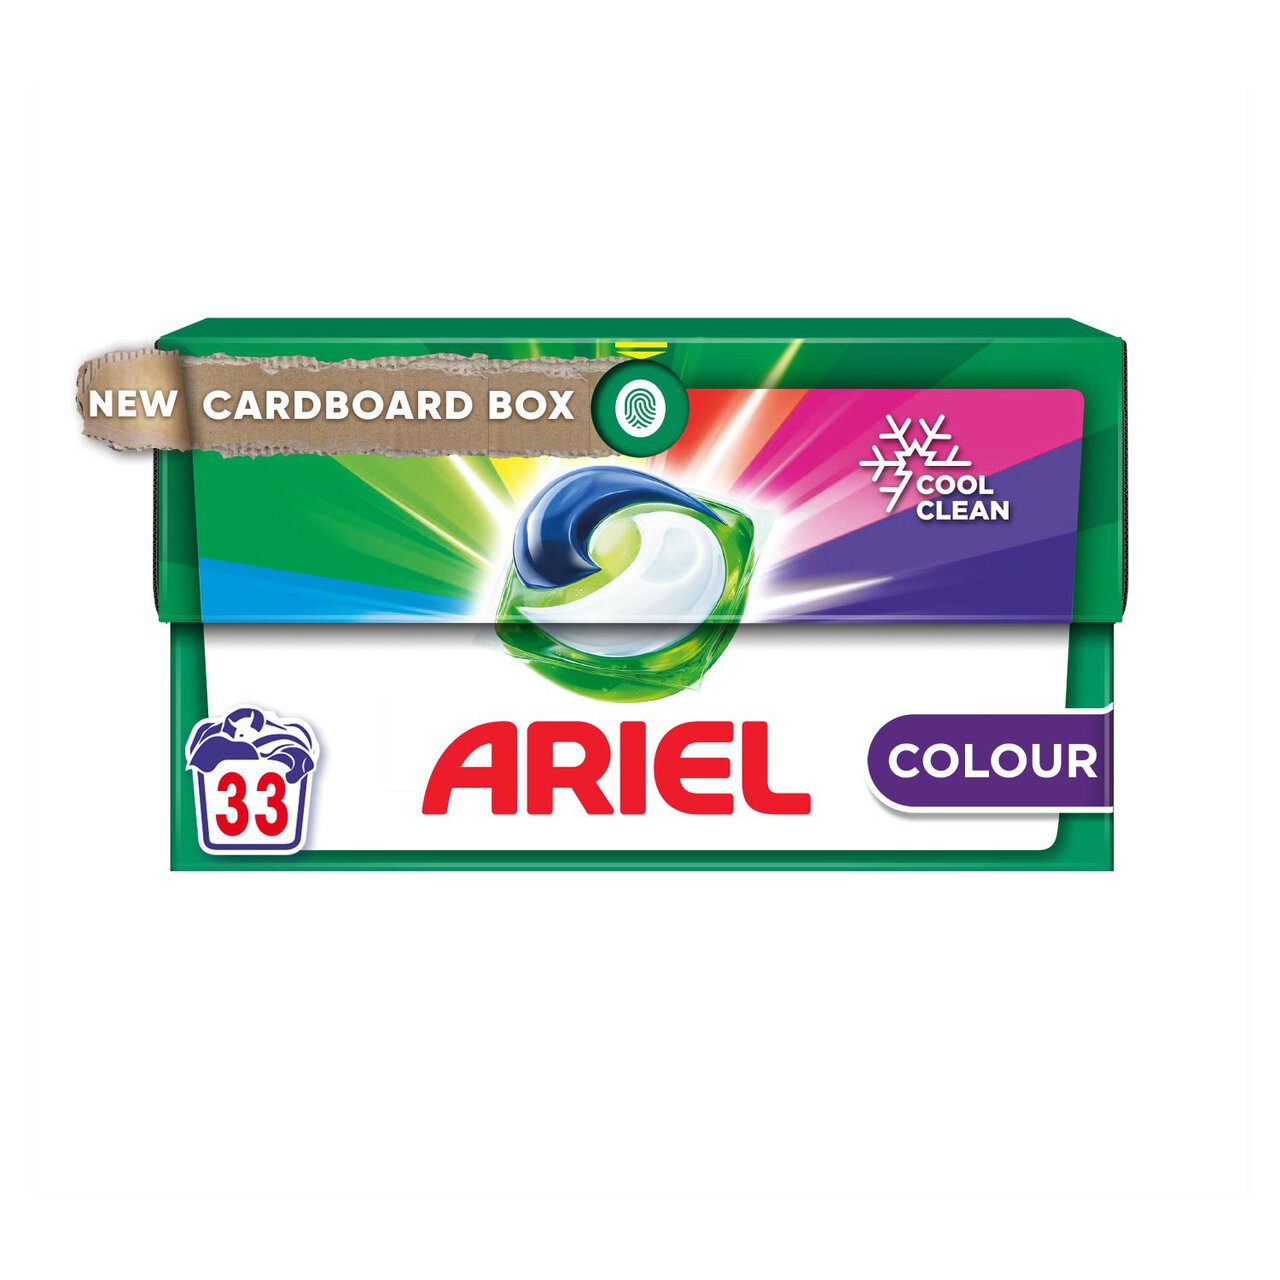 Ariel 3in1 Colour Pods Washing Capsules 33 Washes 33 per pack